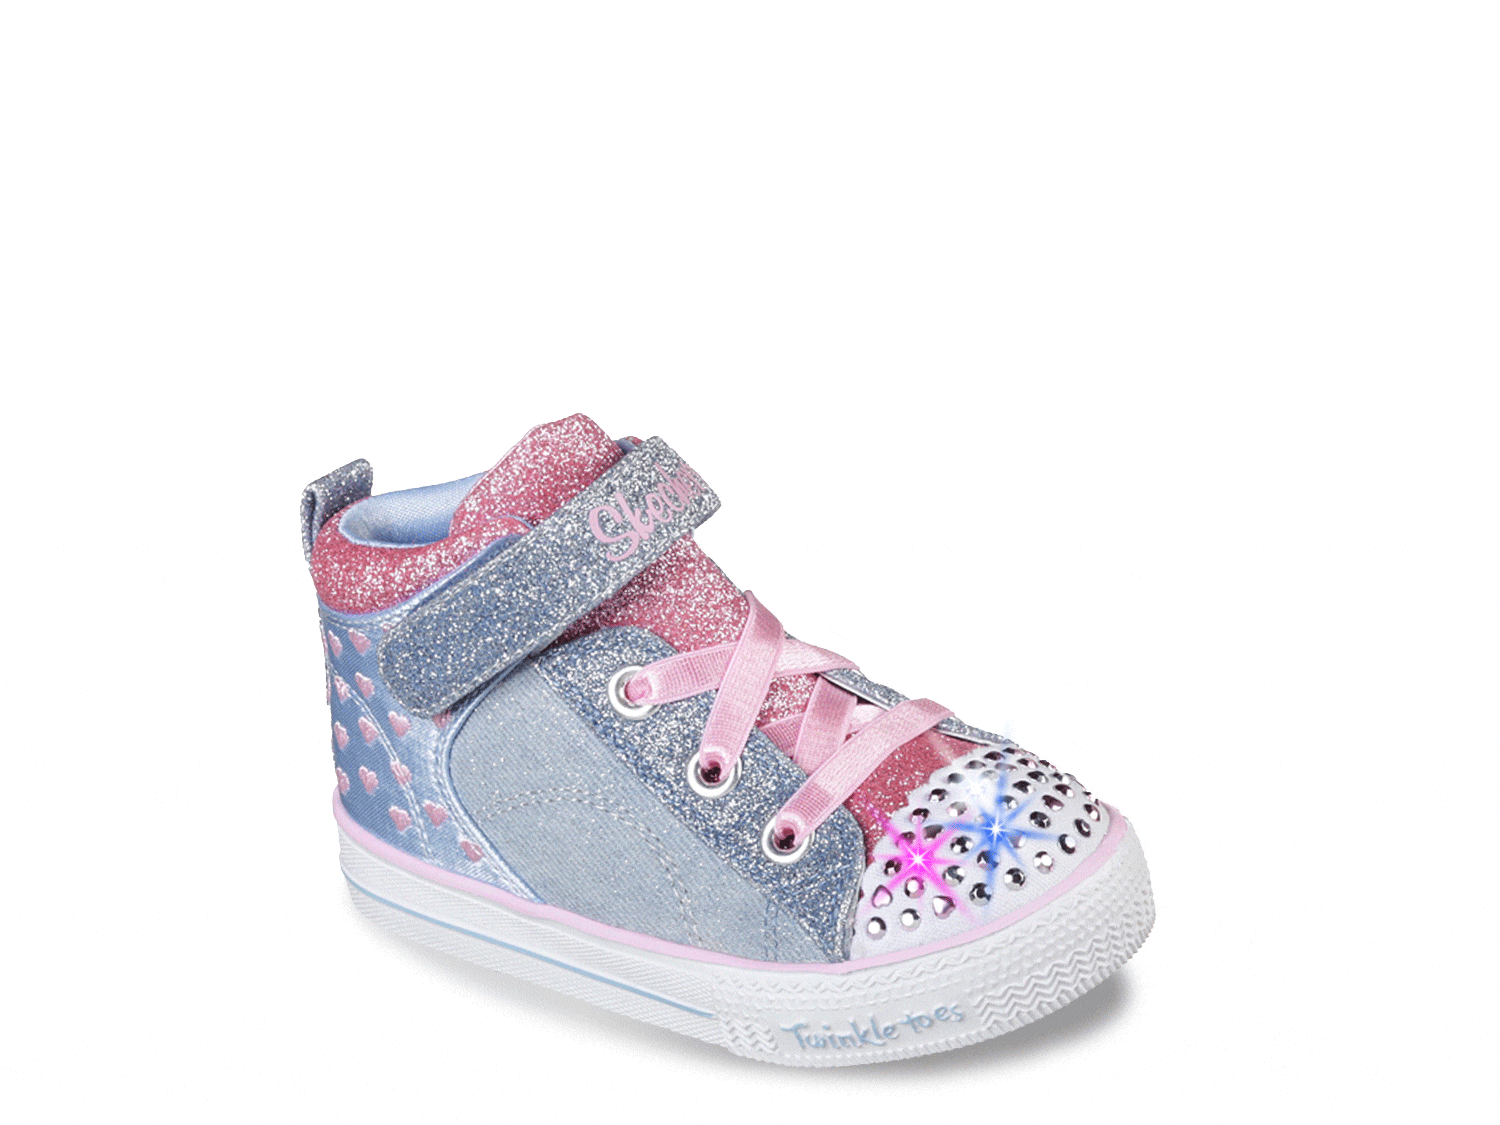 women's twinkle toes shoes